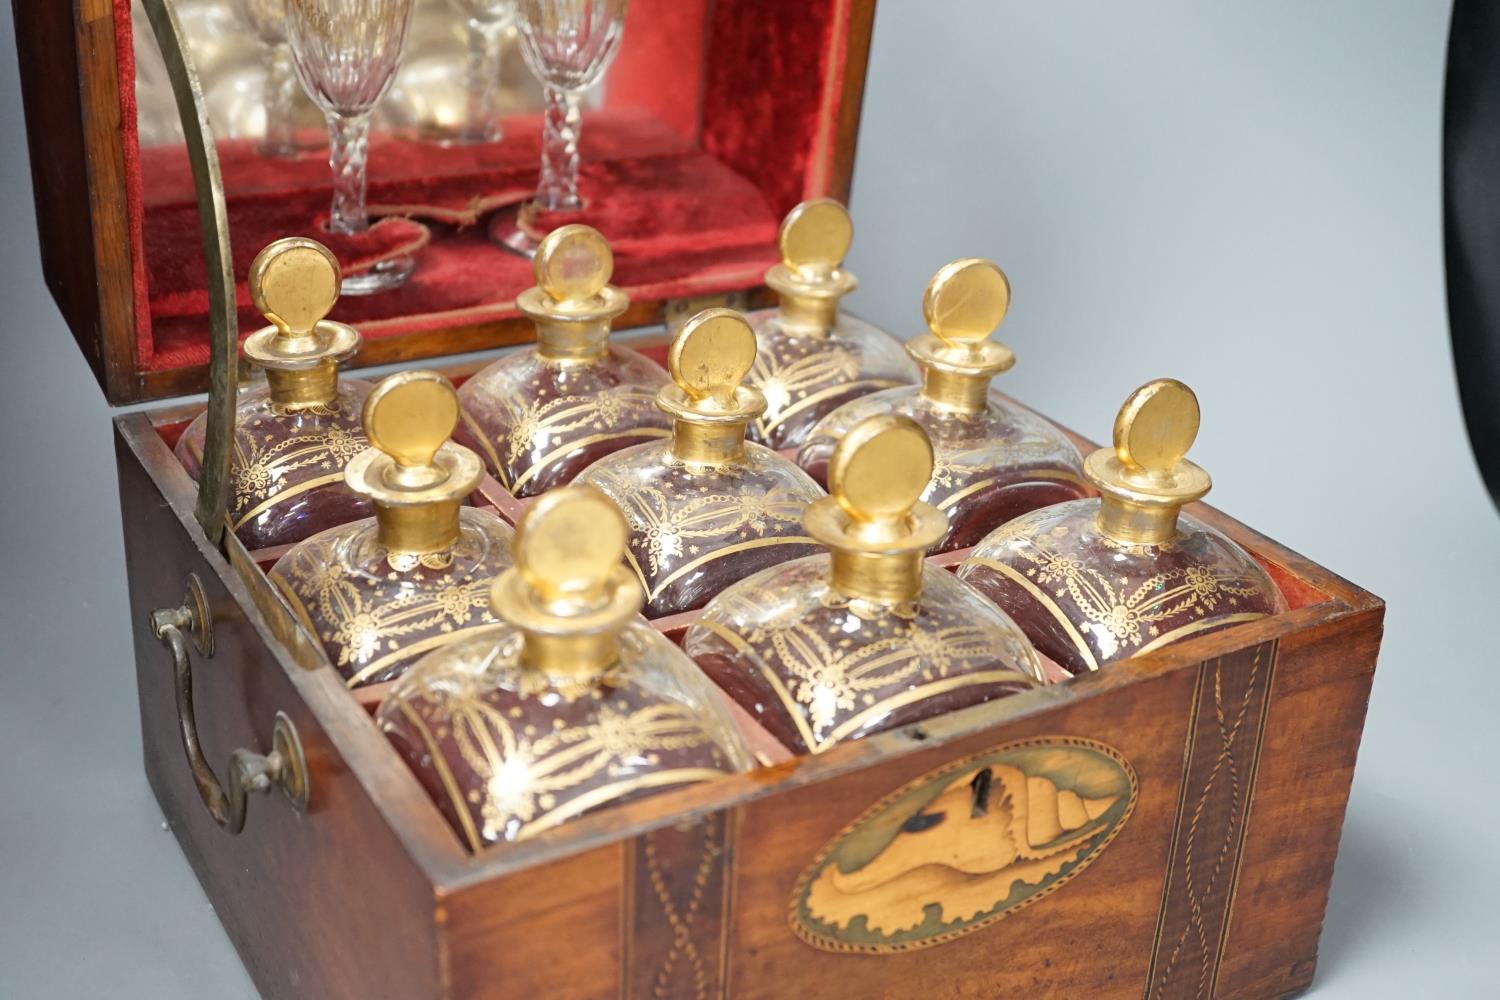 A 19th century Dutch inlaid mahogany decanter box containing nine gilt glass decanters and two - Image 2 of 5